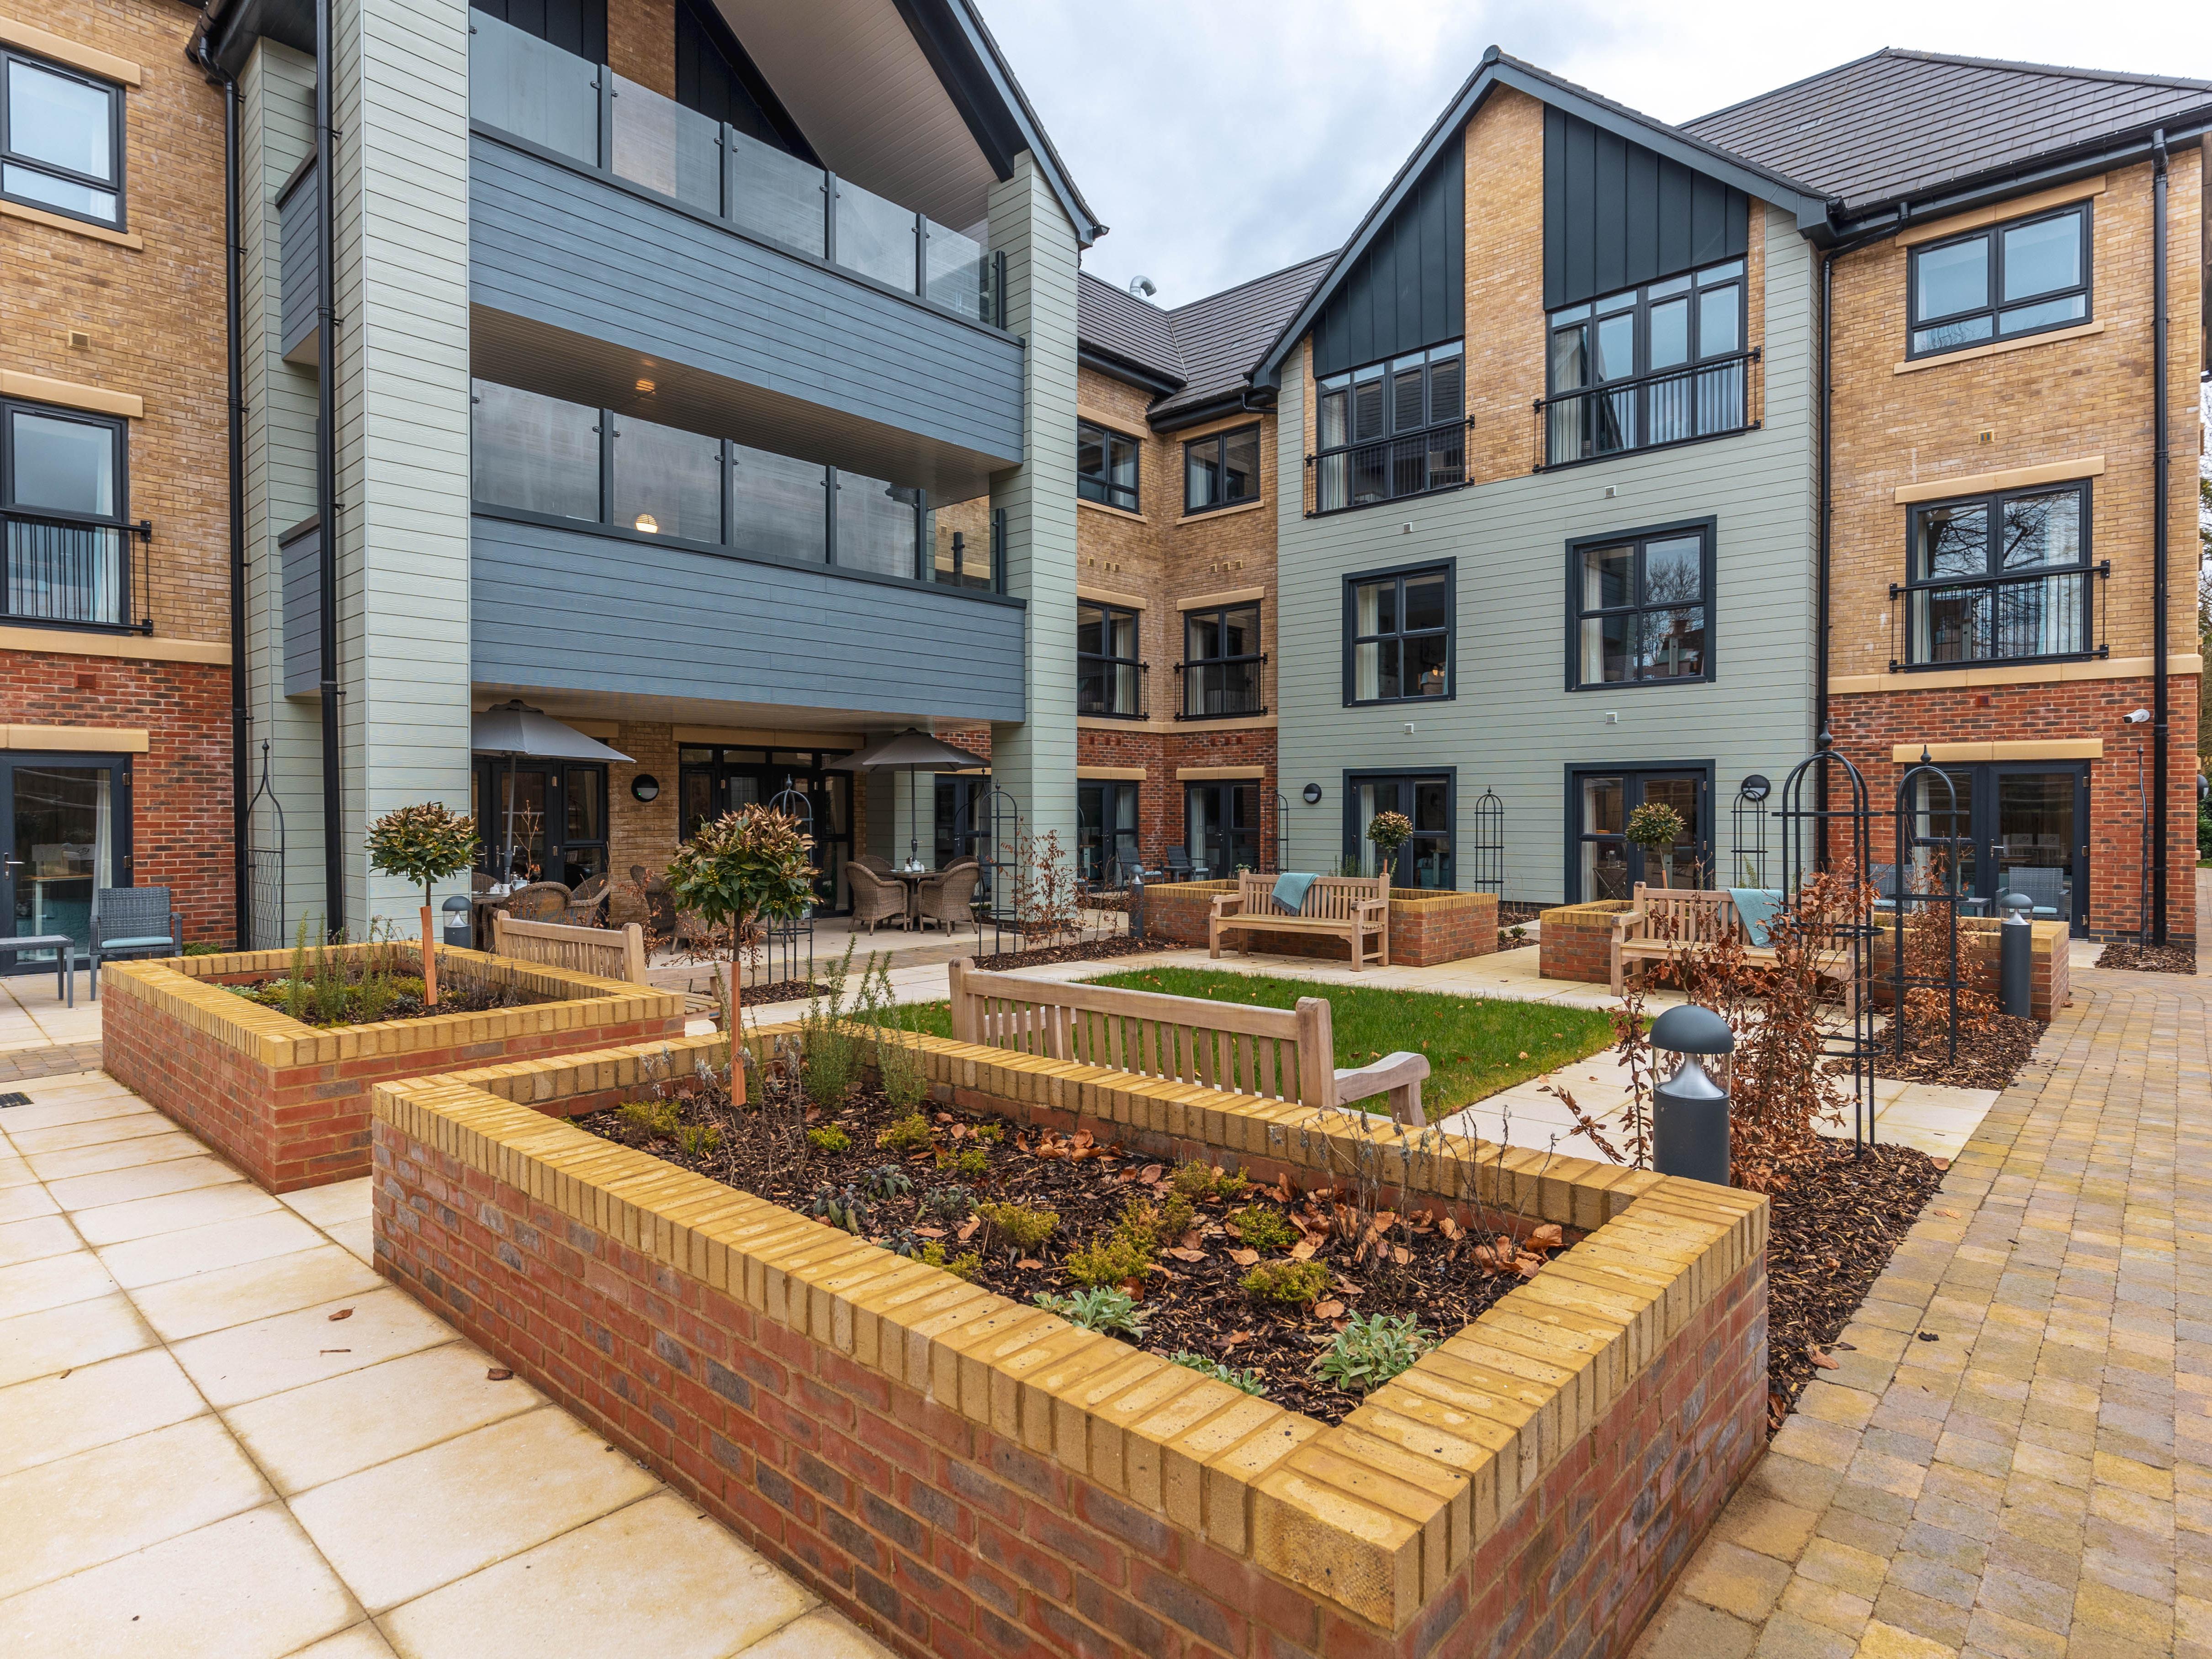 Images Barchester - Shawford Springs Care Home